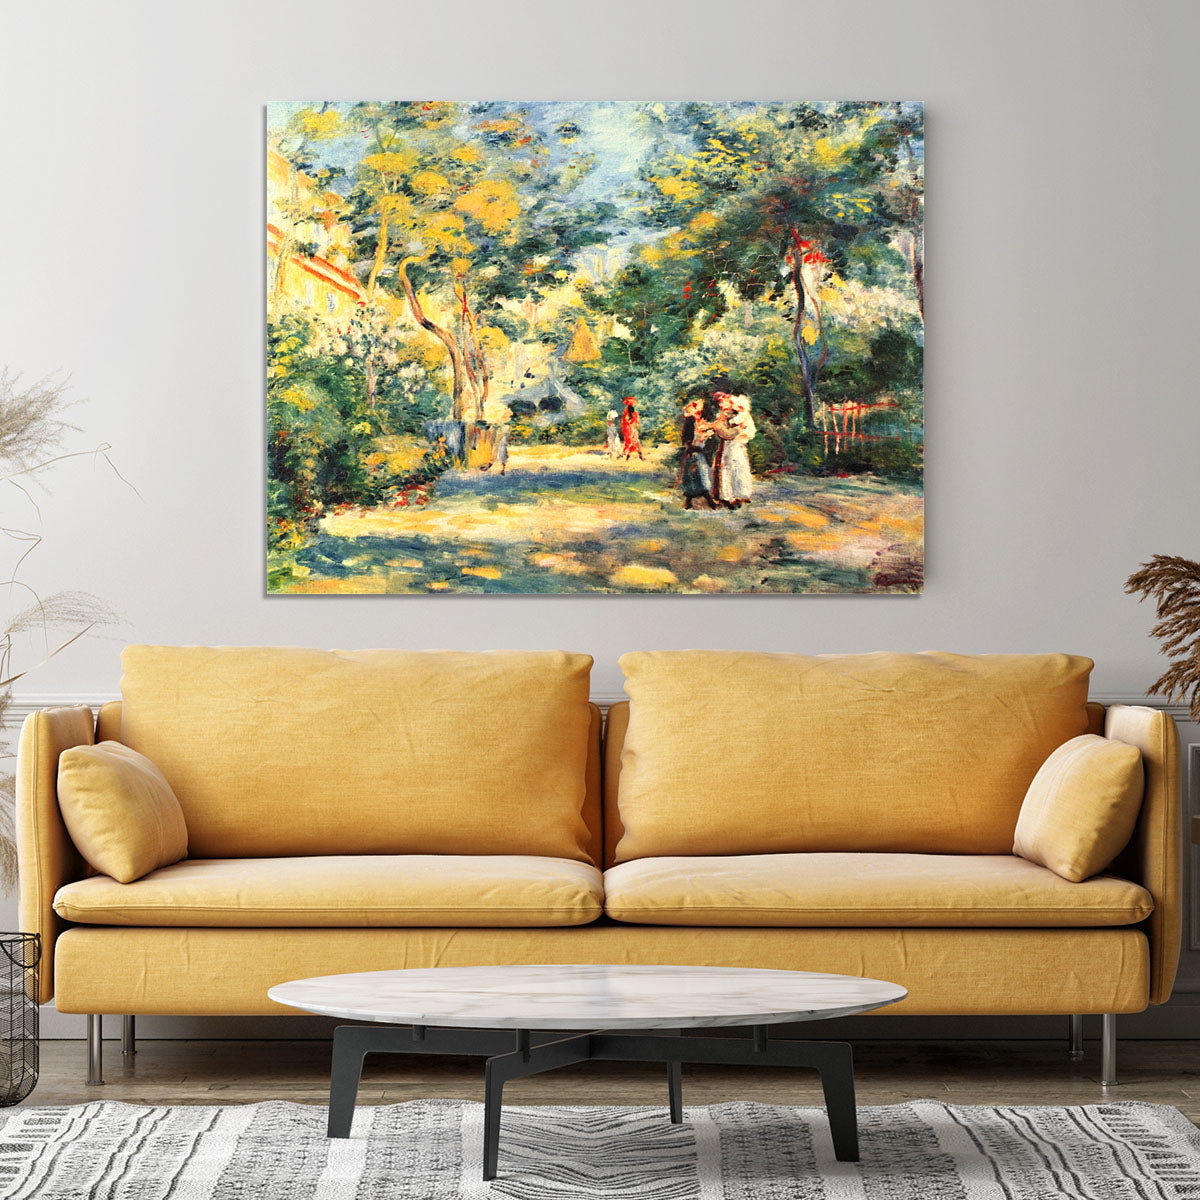 Figures in the garden by Renoir Canvas Print or Poster - Canvas Art Rocks - 4